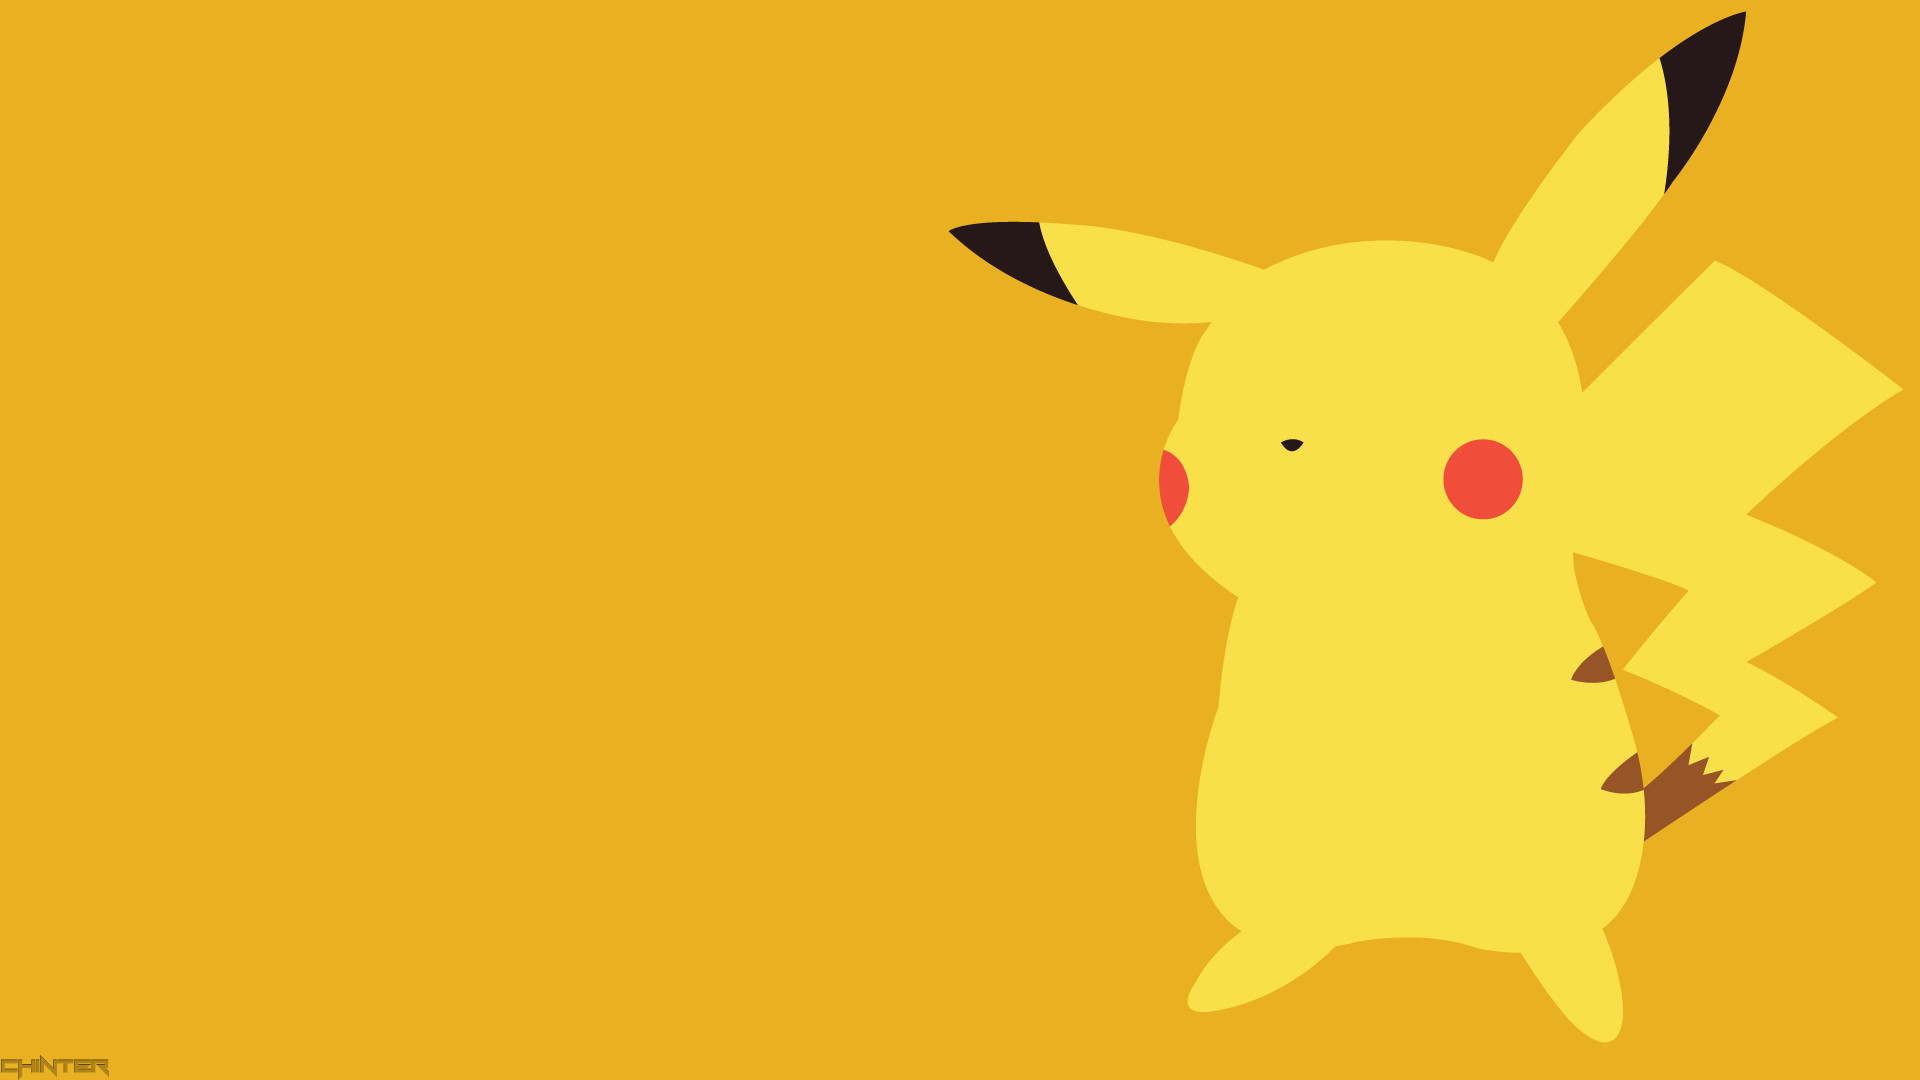 Pikachu is regarded as a major character of the Pokmon franchise as well as its mascot, and has become an icon of Japanese pop culture in recent years